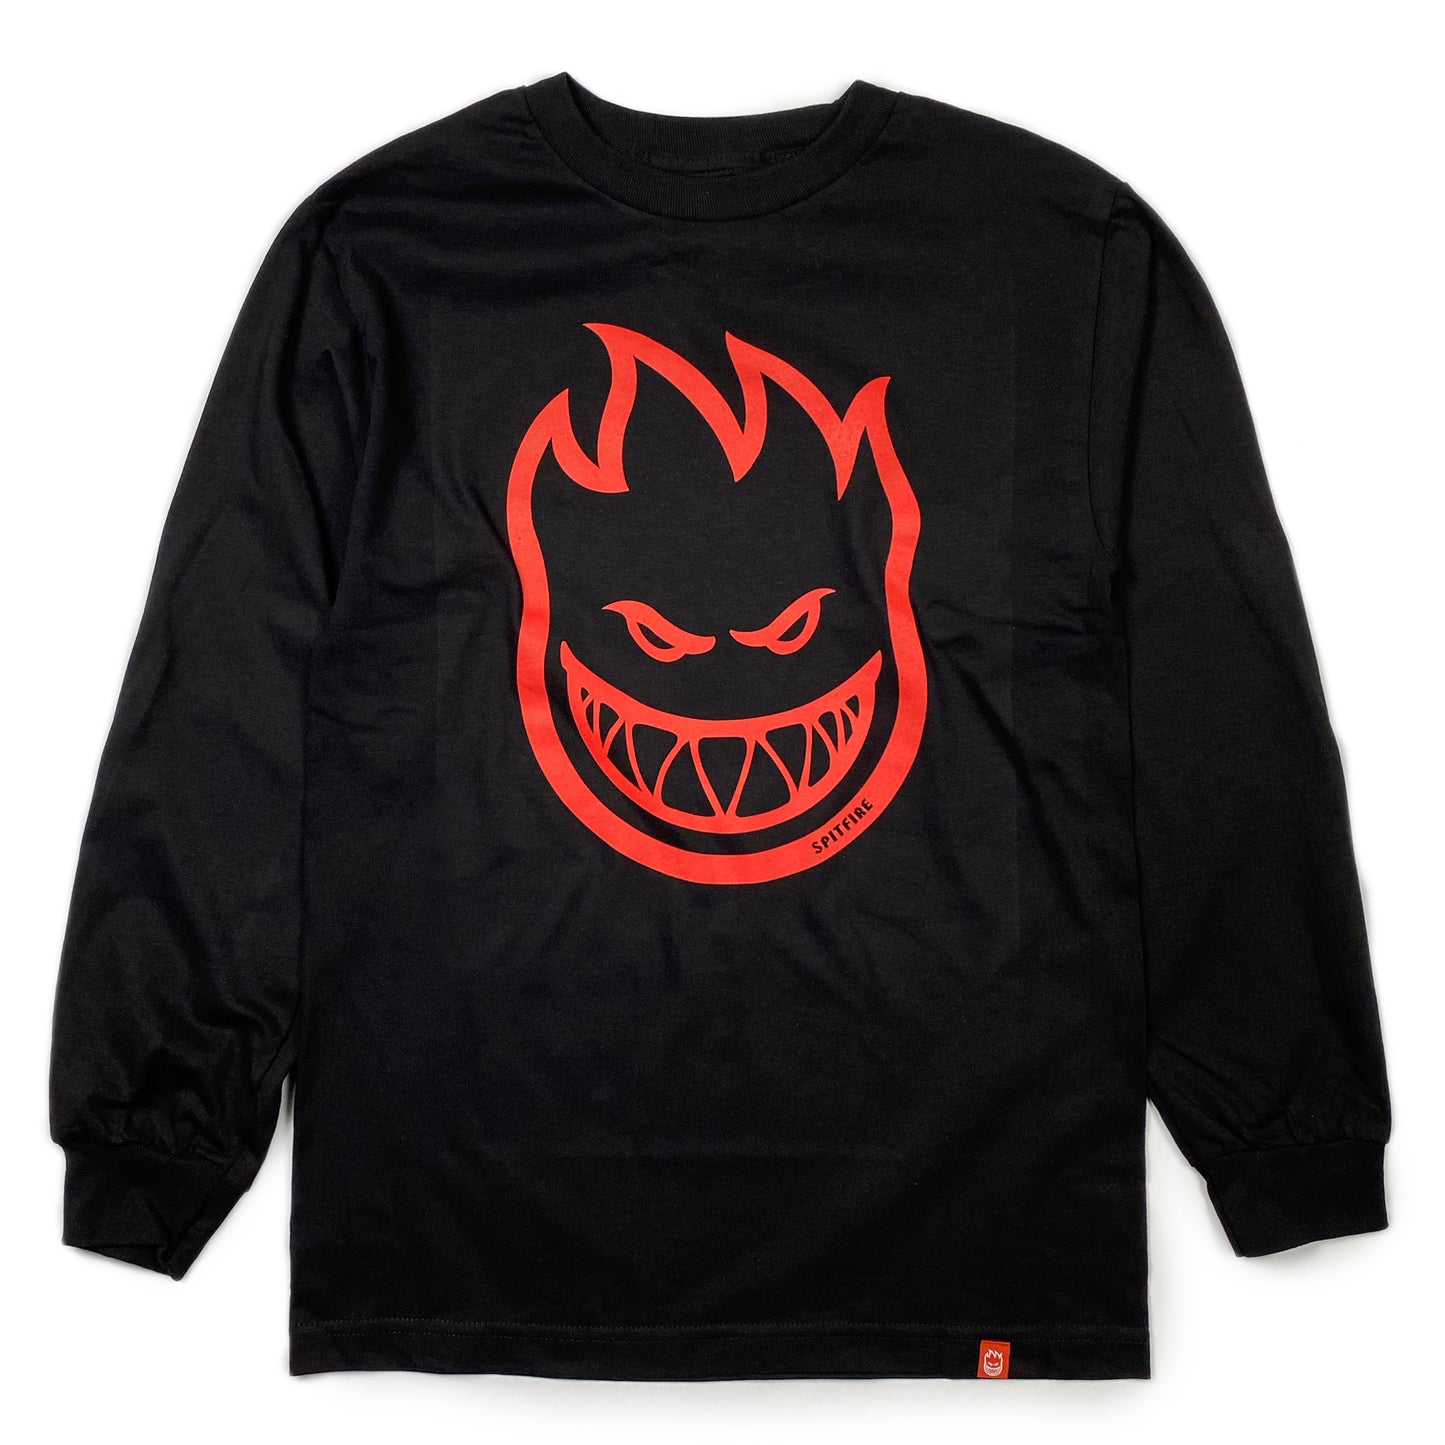 Spitfire Bighead Long Sleeve T - Black / Red - Prime Delux Store